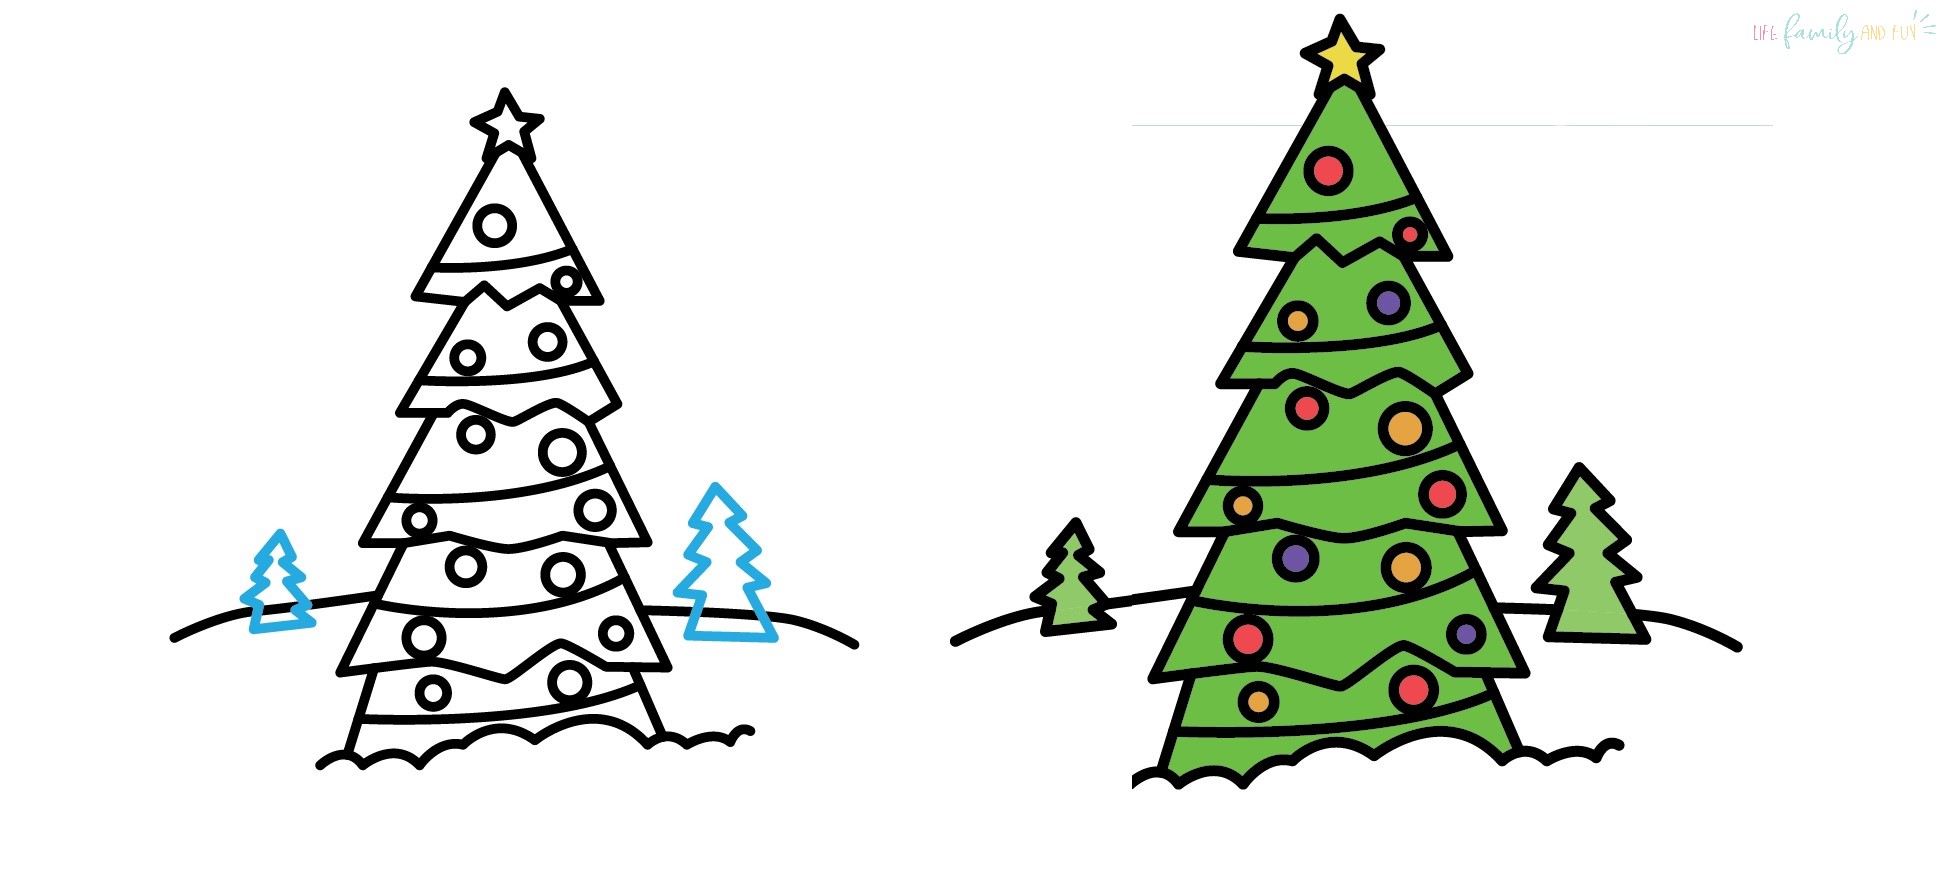 How to draw a Christmas tree - step 7